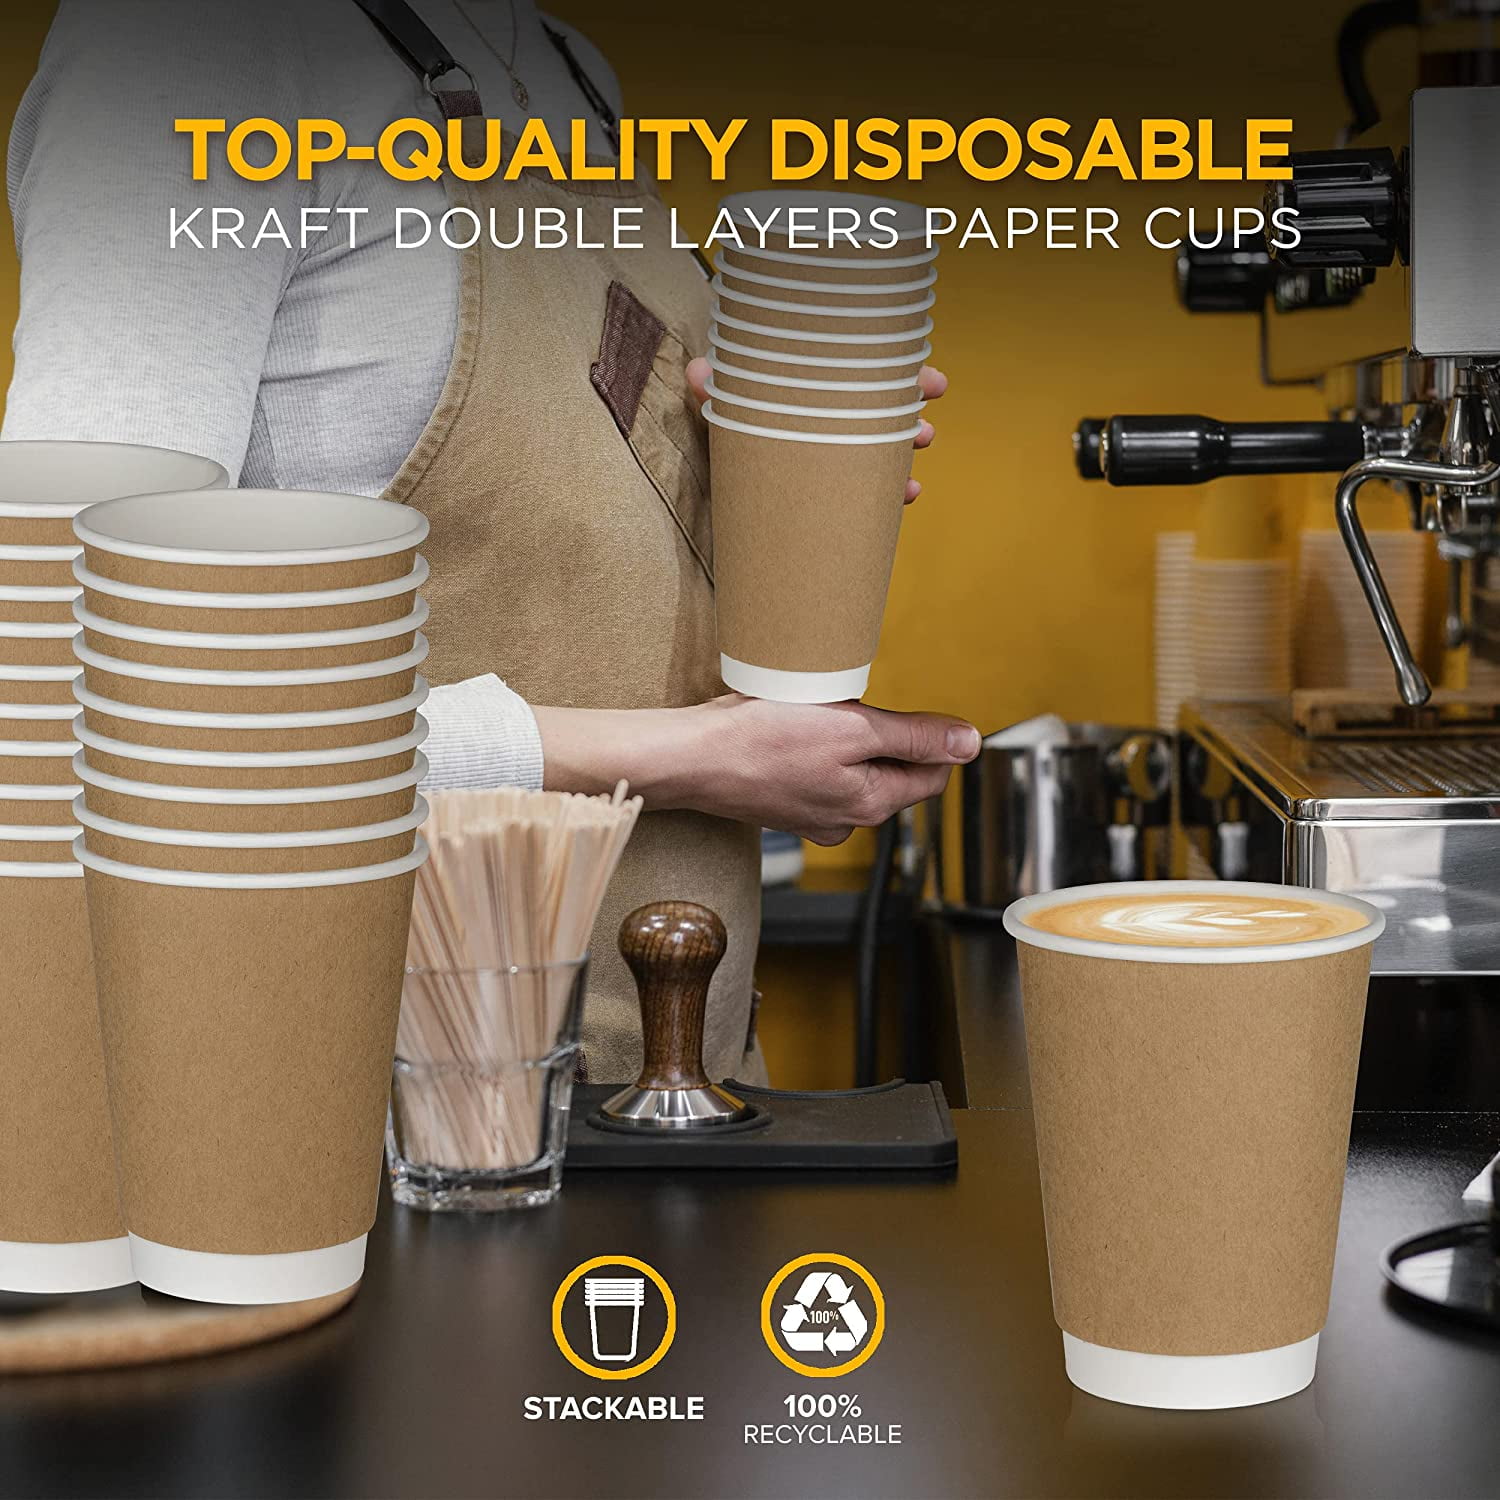 [200 Count] 8 oz Disposable Insulated Paper Coffee Cups with Lids - Double Wall Disposable Coffee Cups Sleeves Attached - Bio Degradable Eco Friendly